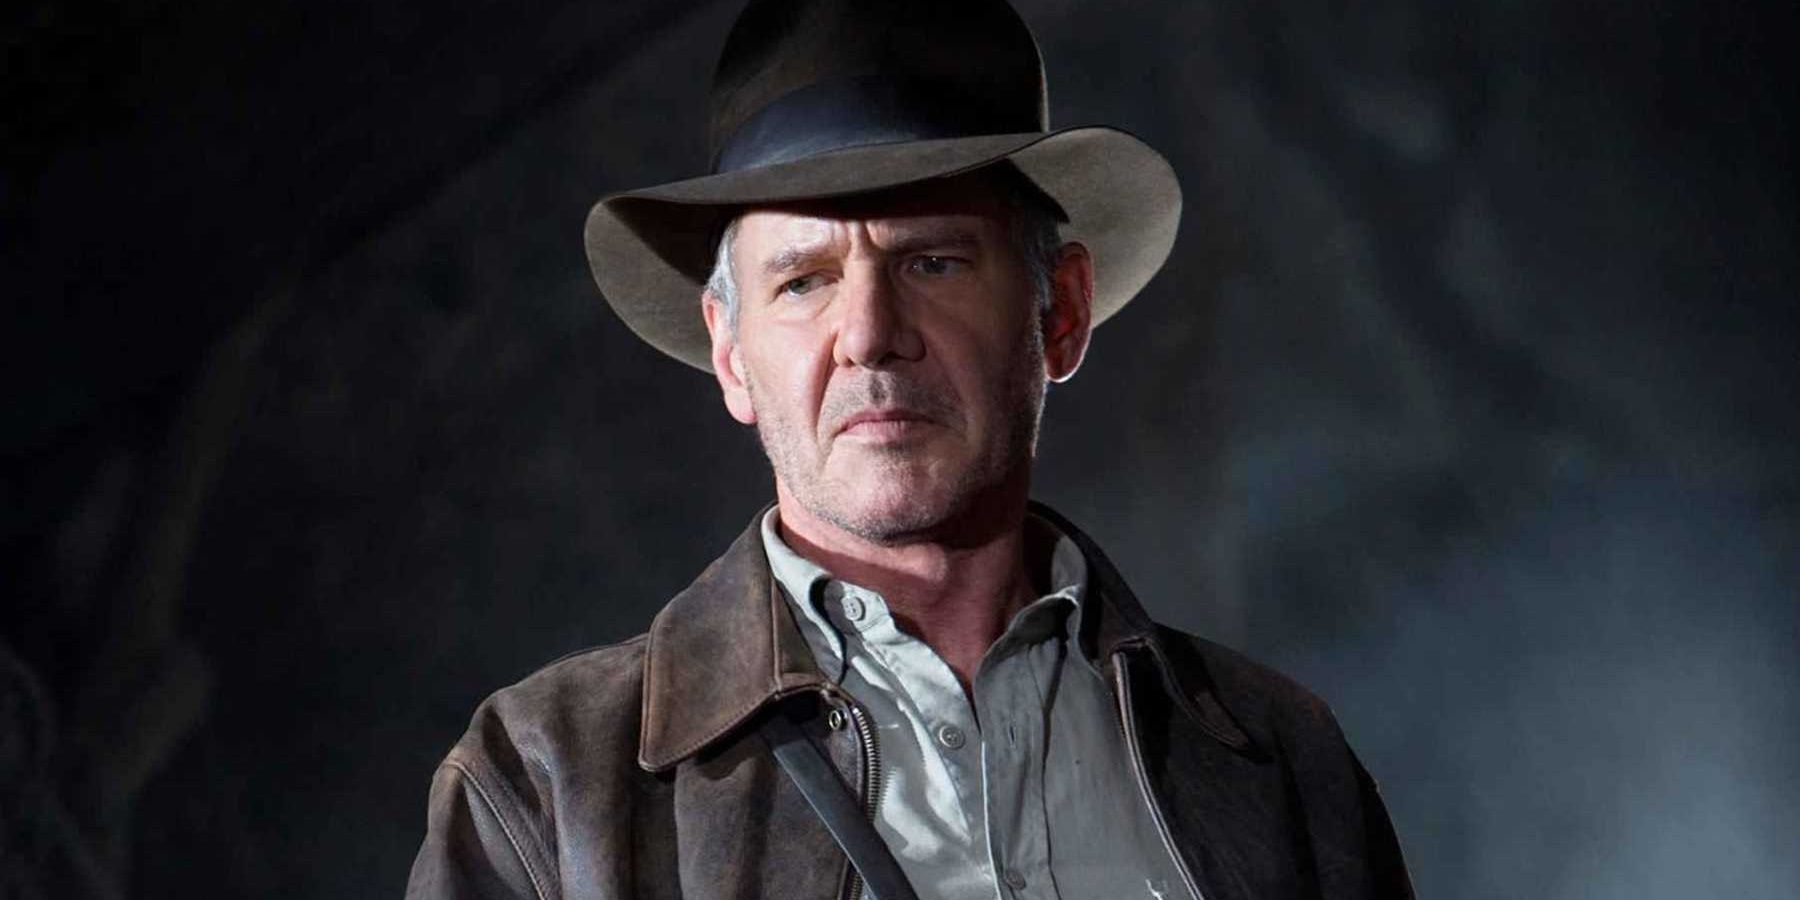 Harrison Ford Wearing Sling In Photos After Indiana Jones 5 Injury